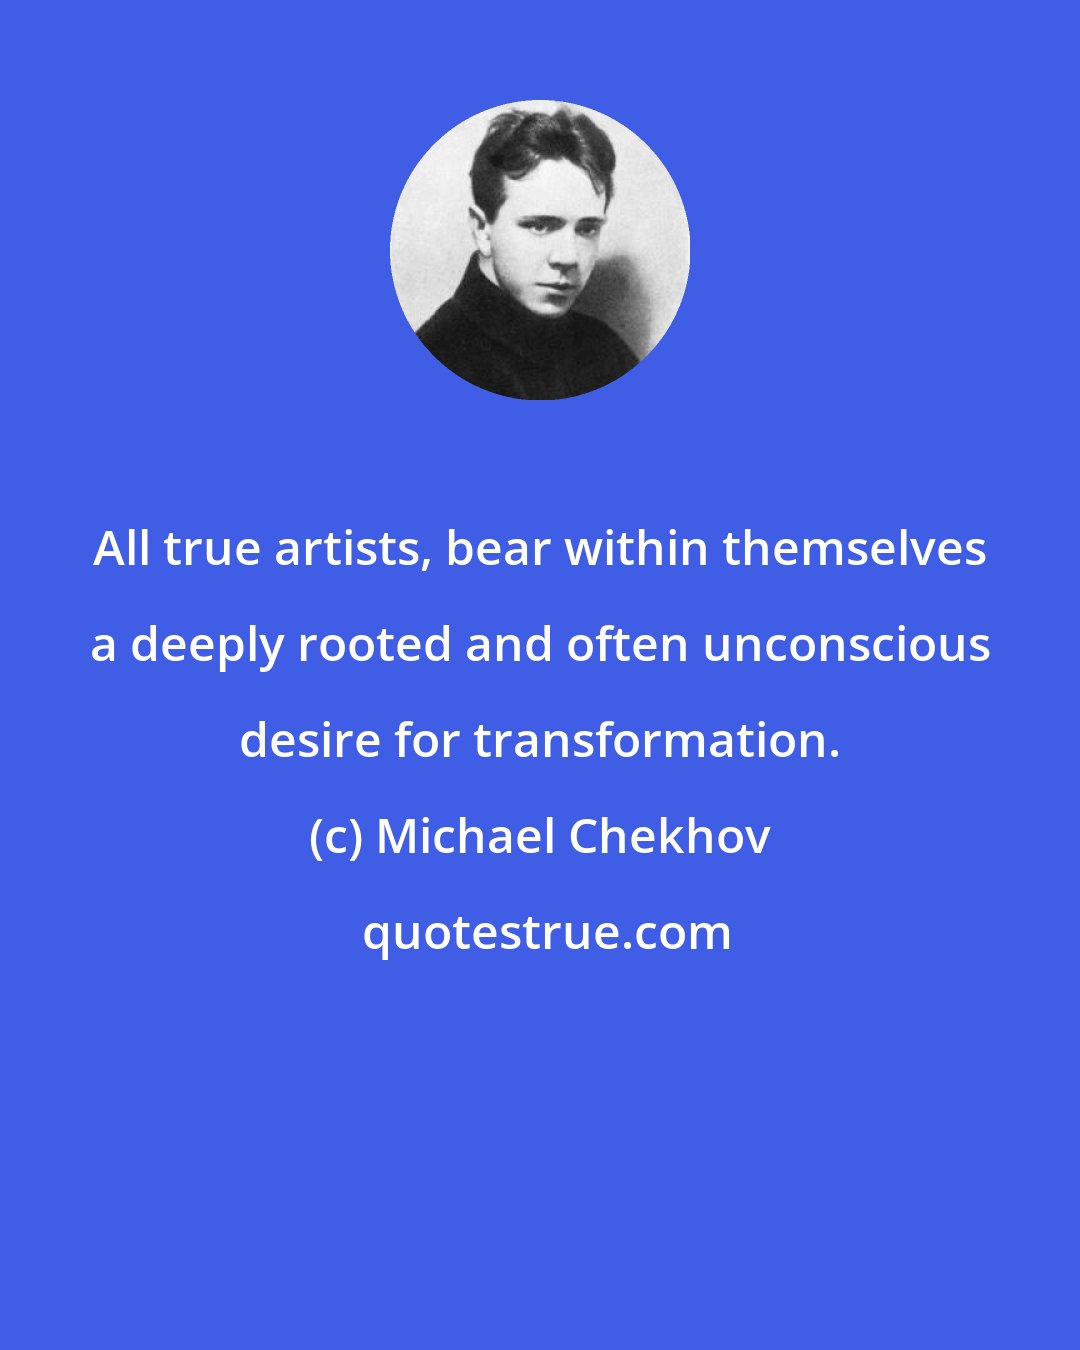 Michael Chekhov: All true artists, bear within themselves a deeply rooted and often unconscious desire for transformation.